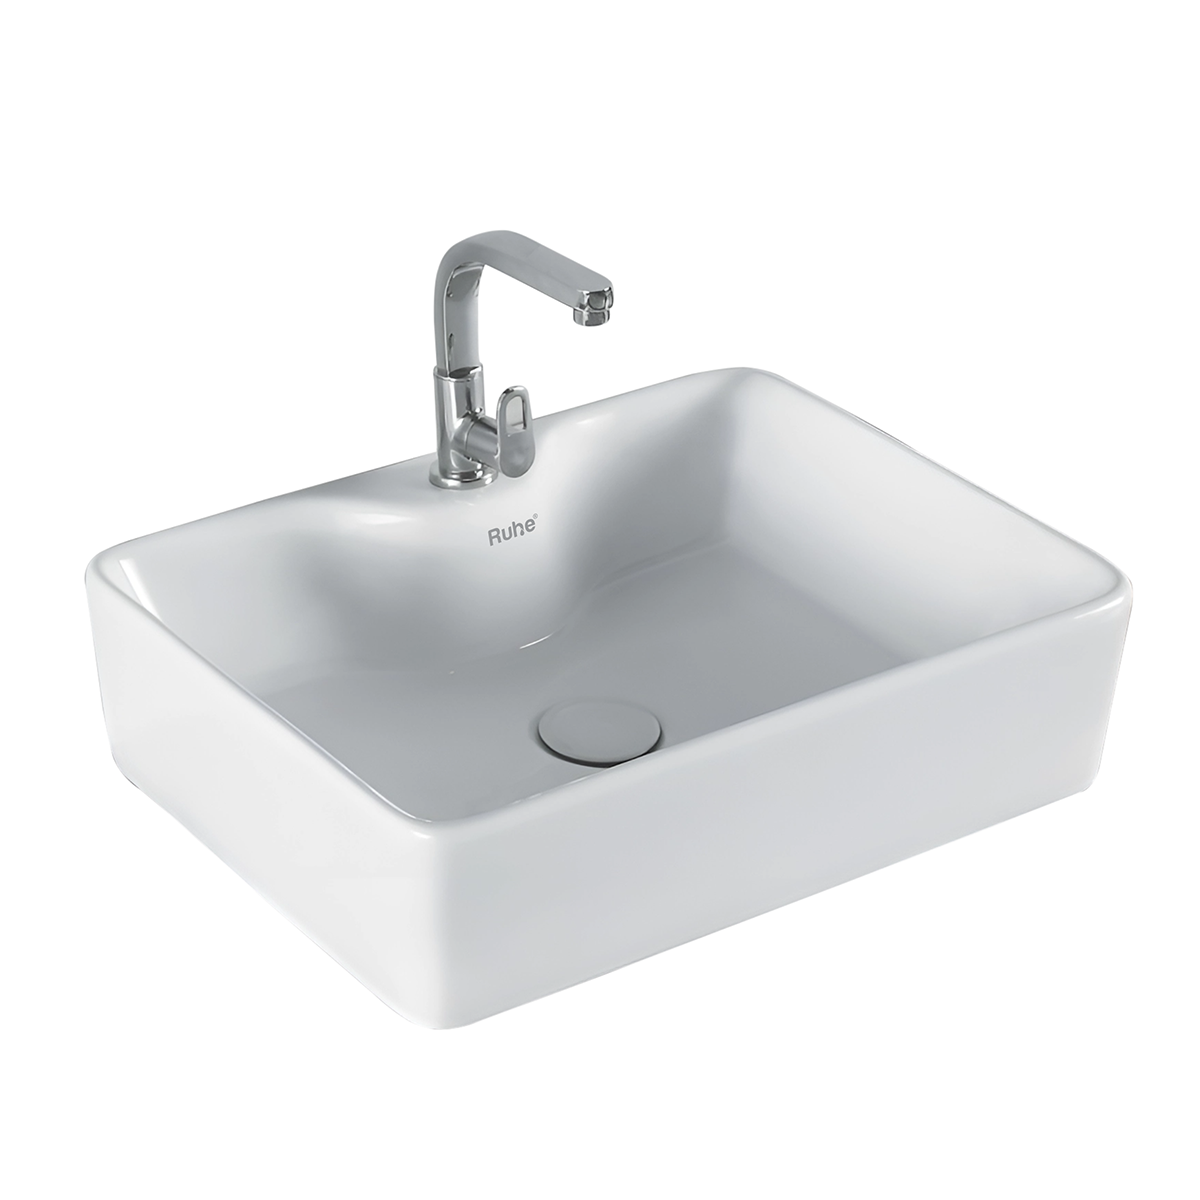 Swift Table Top Wash Basin (White) - by Ruhe®